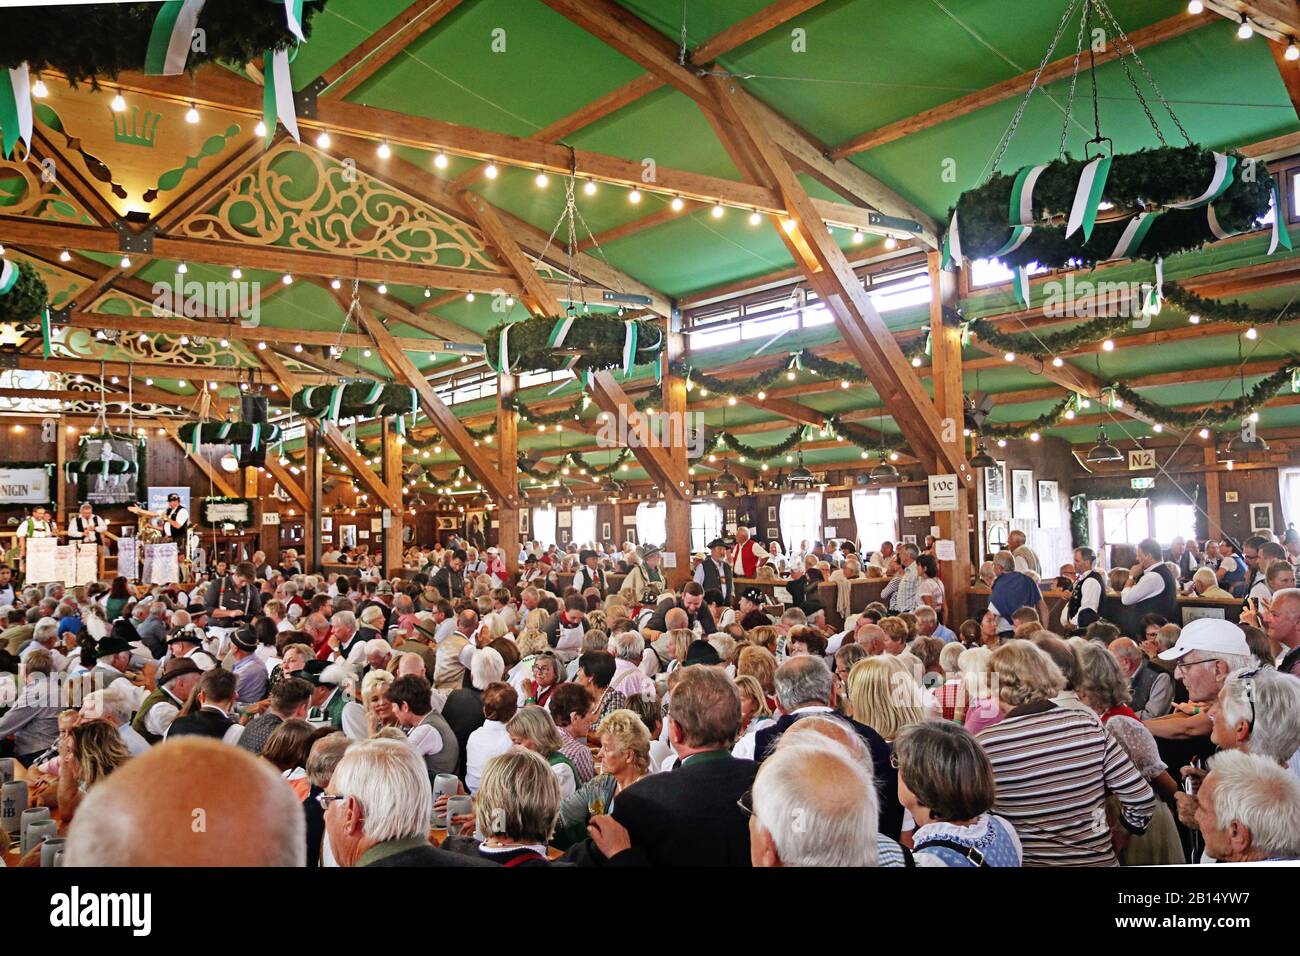 MUNICH, GERMANY - OCTOBER 1, 2019 Beer tent at Oide Wiesn historical part of the Oktoberfest in Munich, family  friendly environment Stock Photo